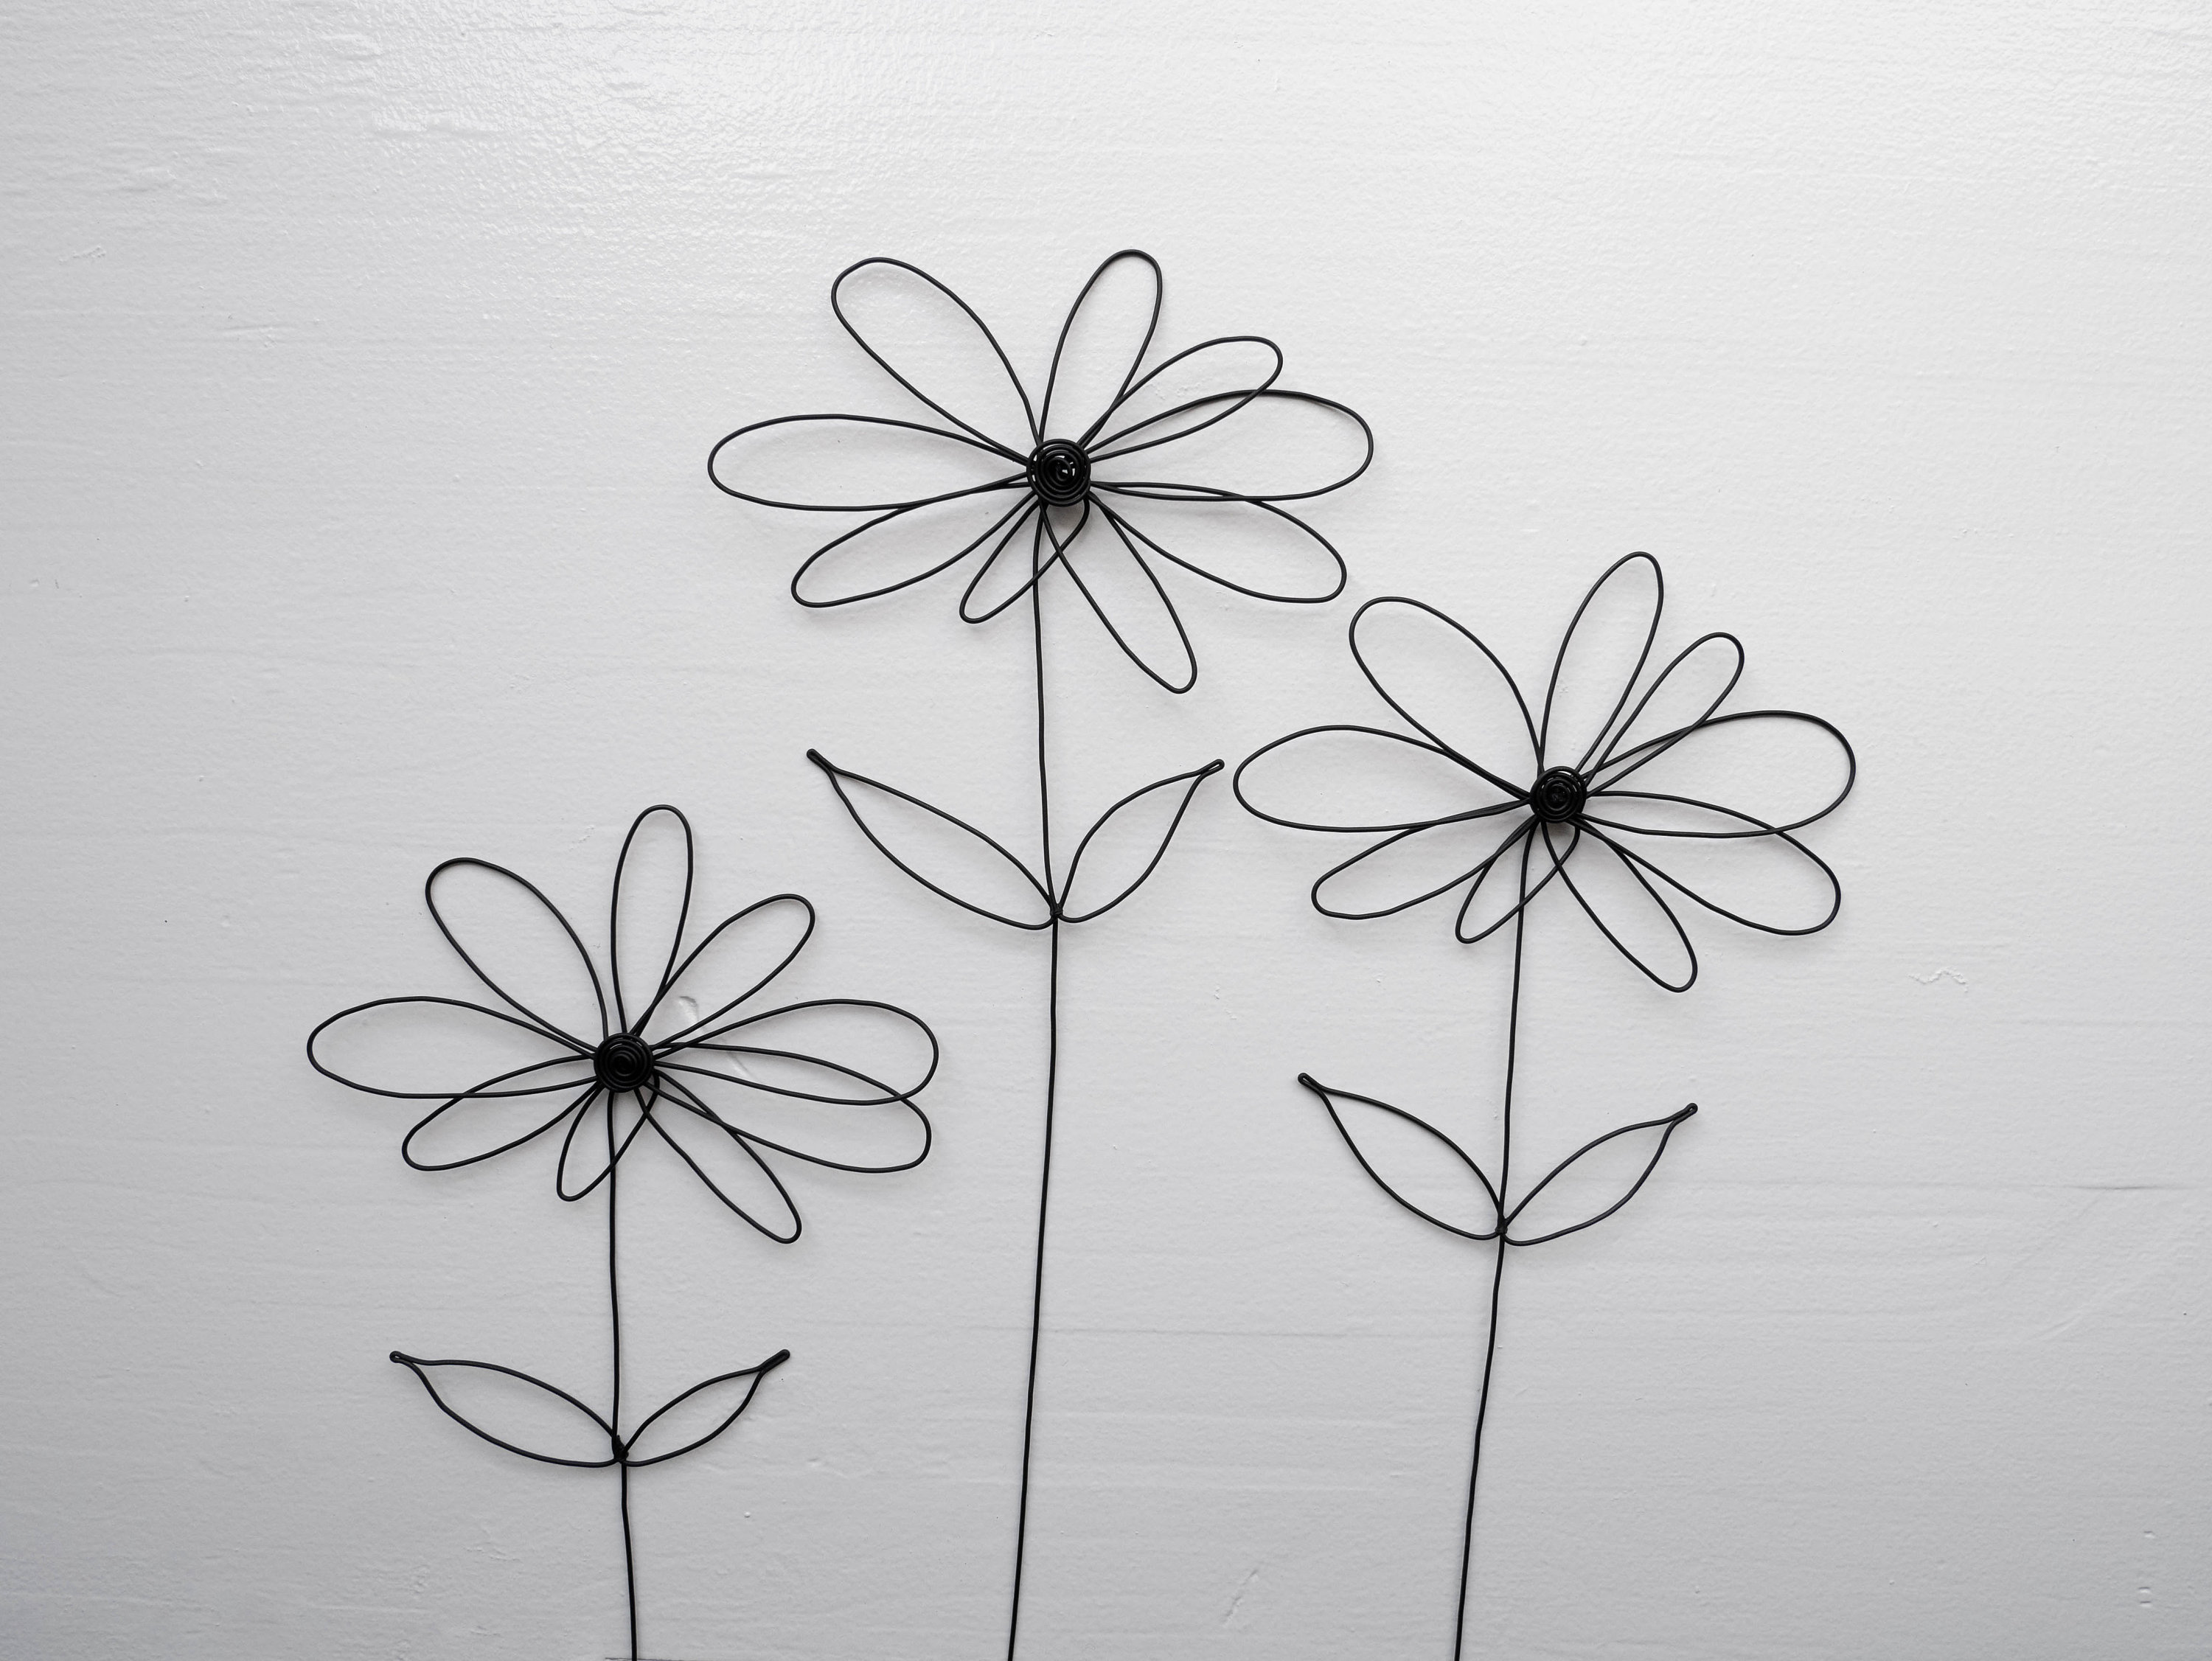 Bouquet of 10 3D Flowers in Annealed Wire Flower, Artificial Flower, Floral  Decoration, Boho Nature, Poppy, Daisy, Daisy 